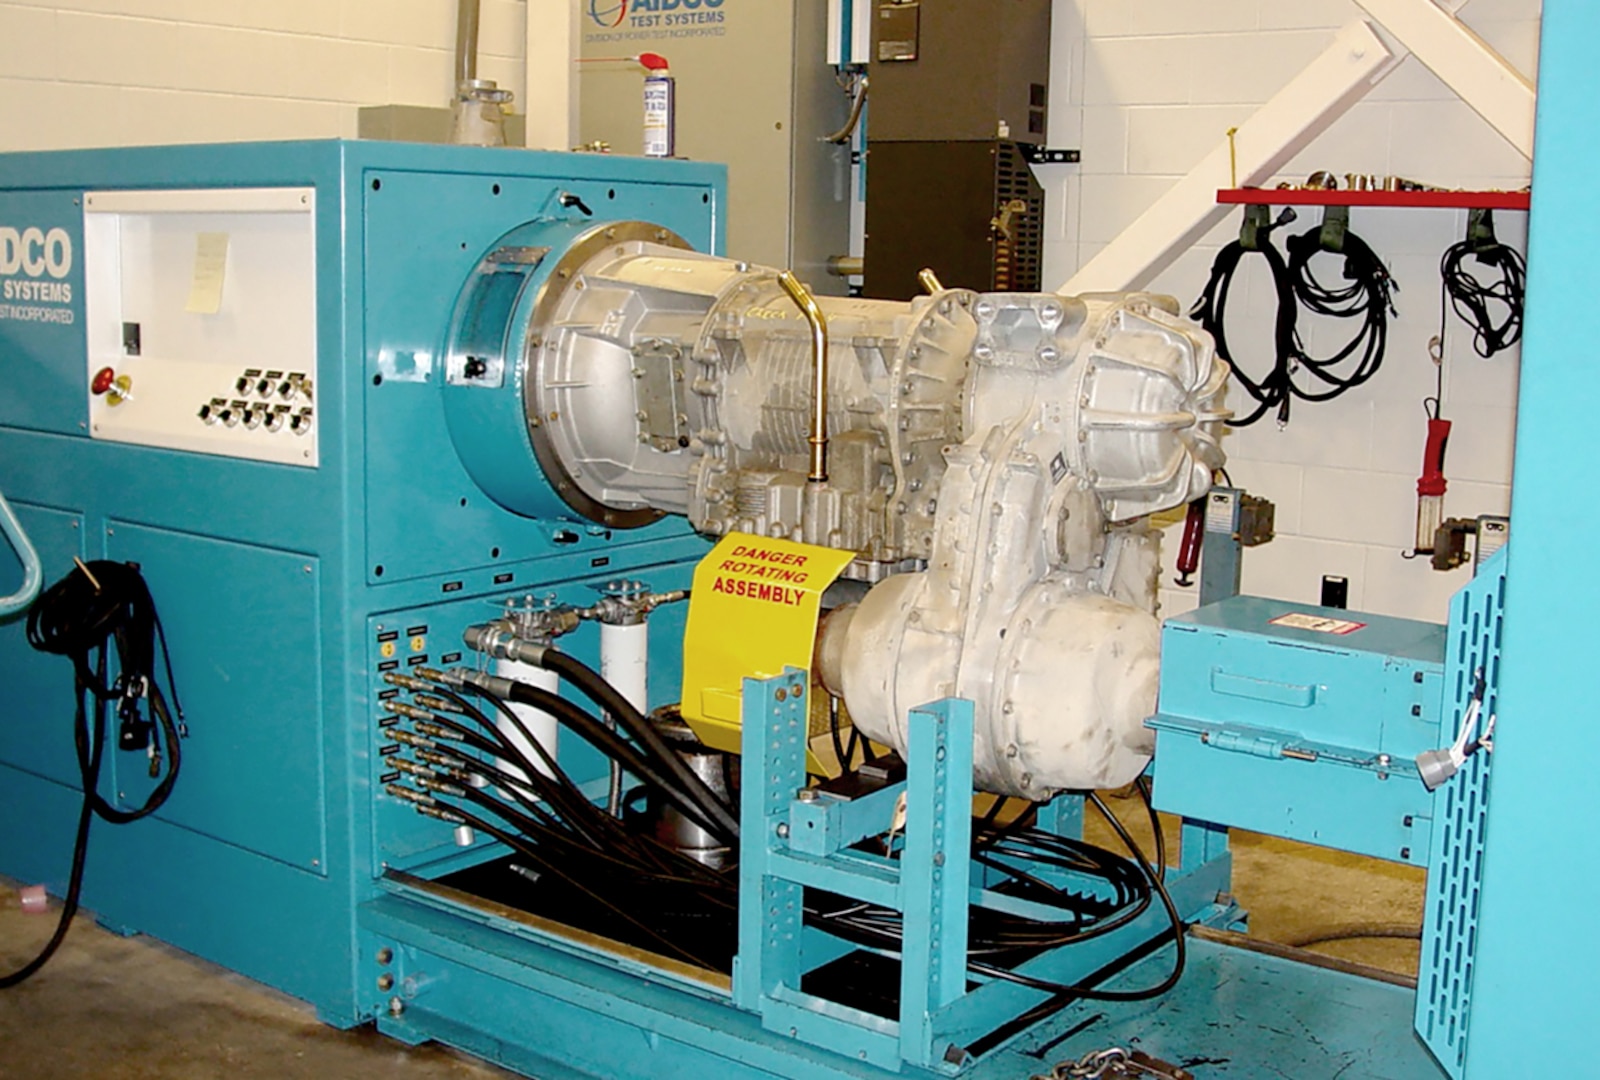 Shown is an AIDCO model 450 transmission dynamometer installed at the Ohio Army National Guard’s Combined Support Maintenance Shop on Defense Supply Center Columbus. To run the test the transmission subassembly is mounted on the dynamometer and a short lever allows technicians to manually shift gears between park, reverse neutral and drive. Other connections allow control and data signals to pass between the control console and the transmission.